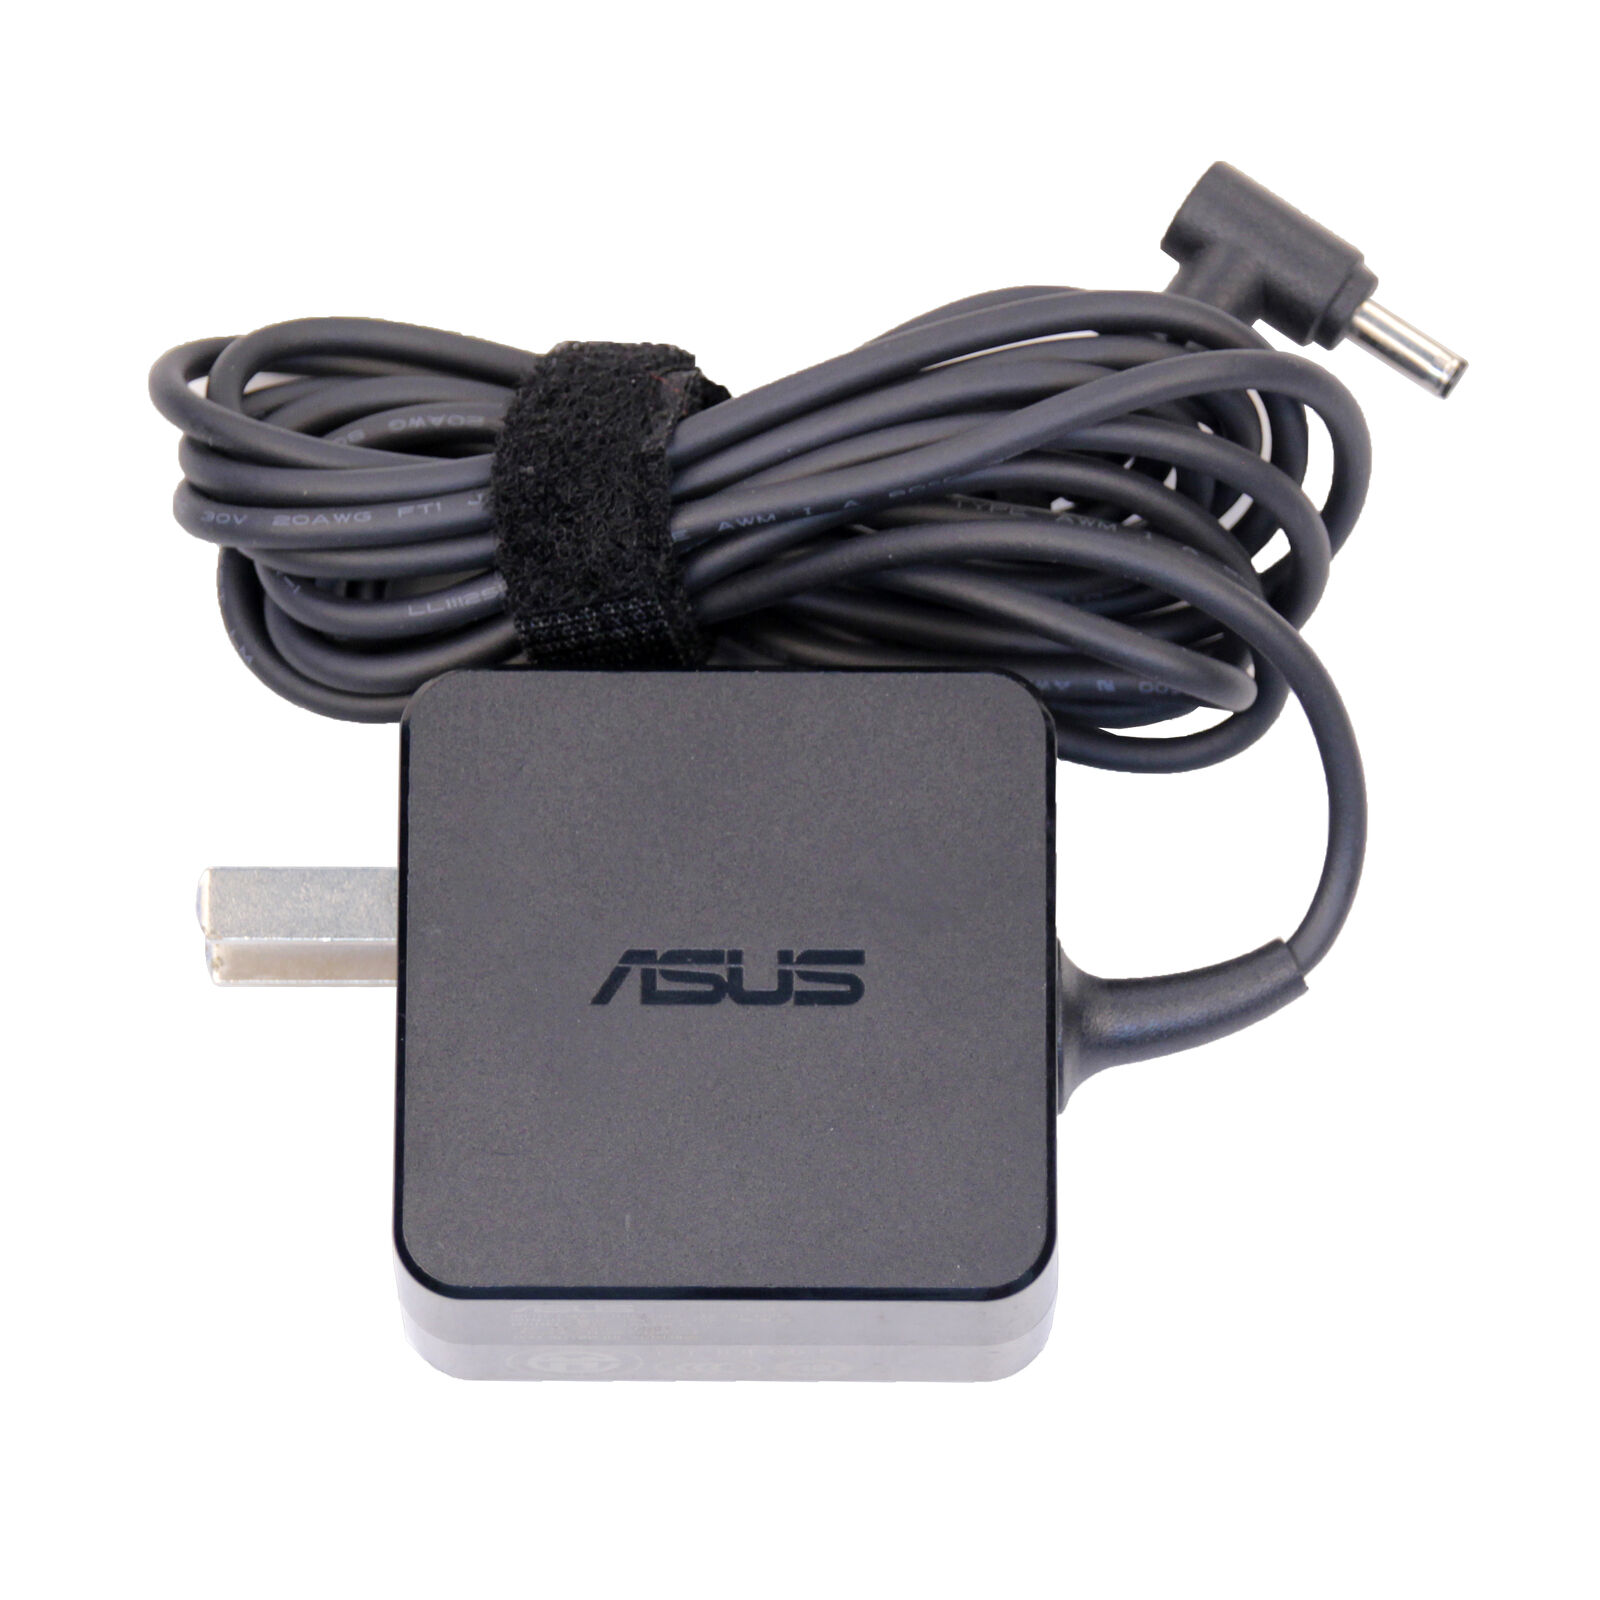 ASUS AD890326 19V 1.75A 33W Genuine Original AC Power Adapter Charger